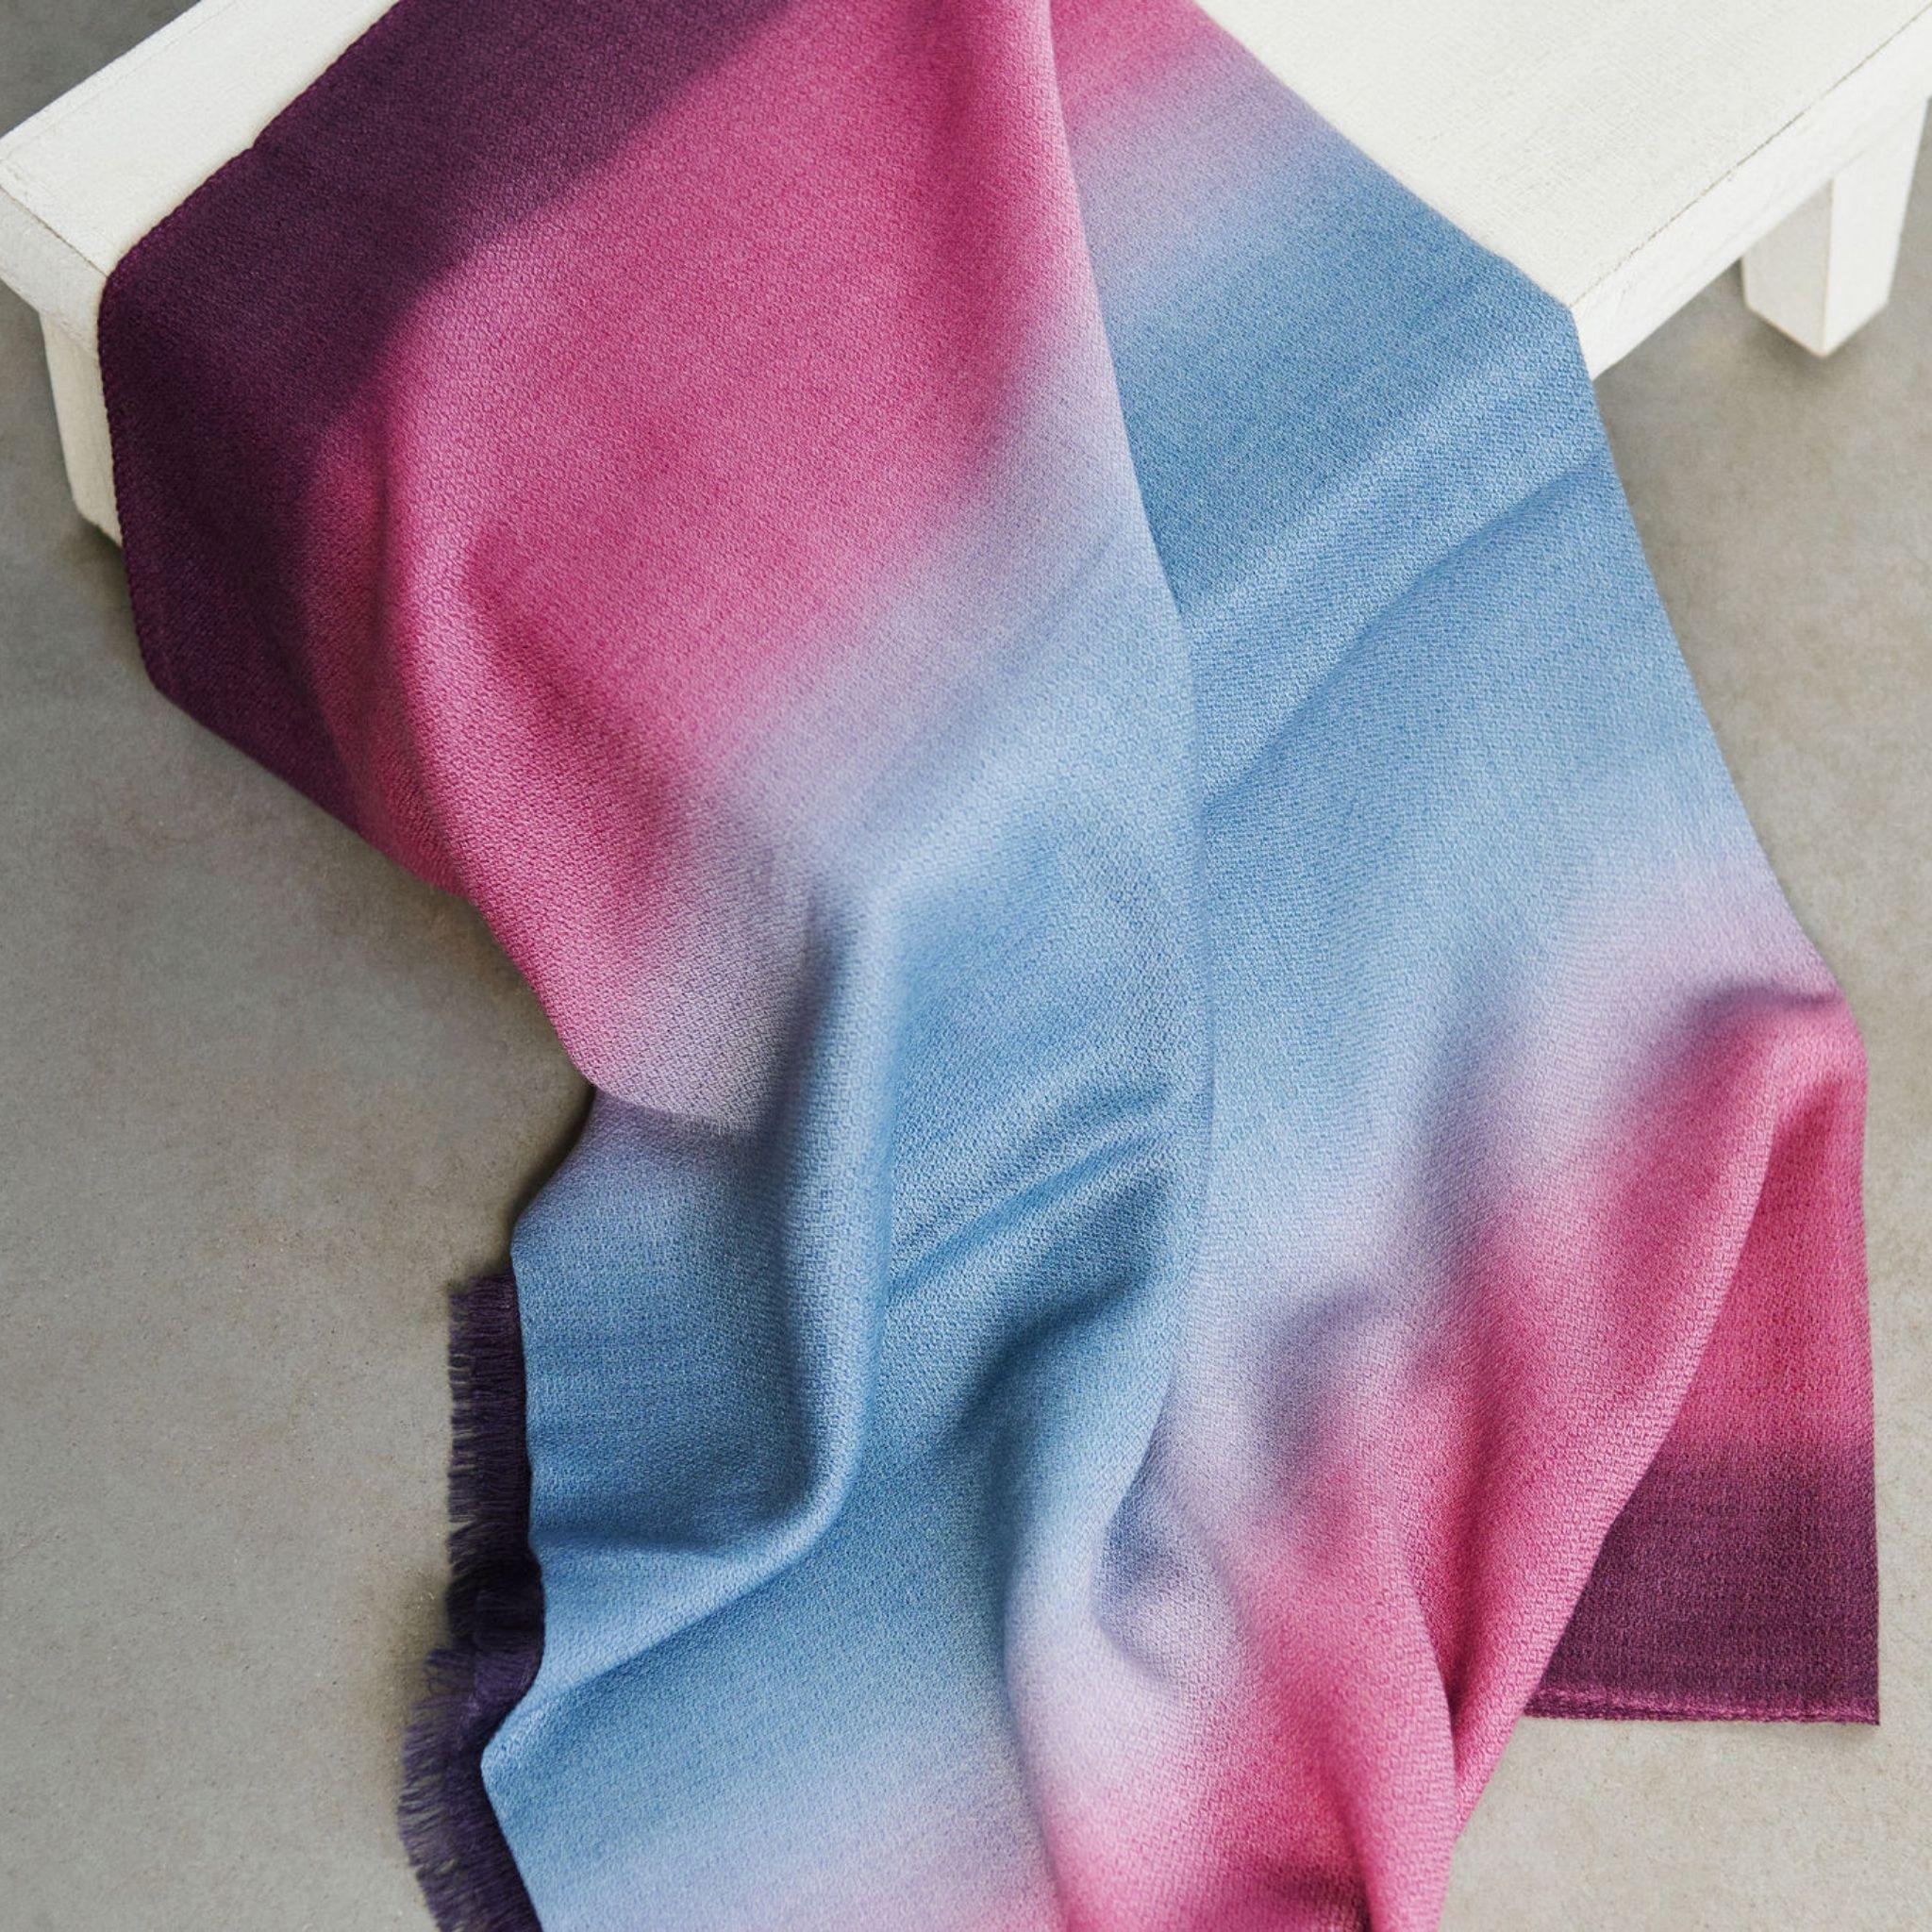 Combining simplicity & elegance with artistic luxury, Iris Haze Scarf has been carefully dyed by master artisans to give this beautiful one of a kind effect of colors blending. The fine micro diamond weave texture of merino & cashmere add value to